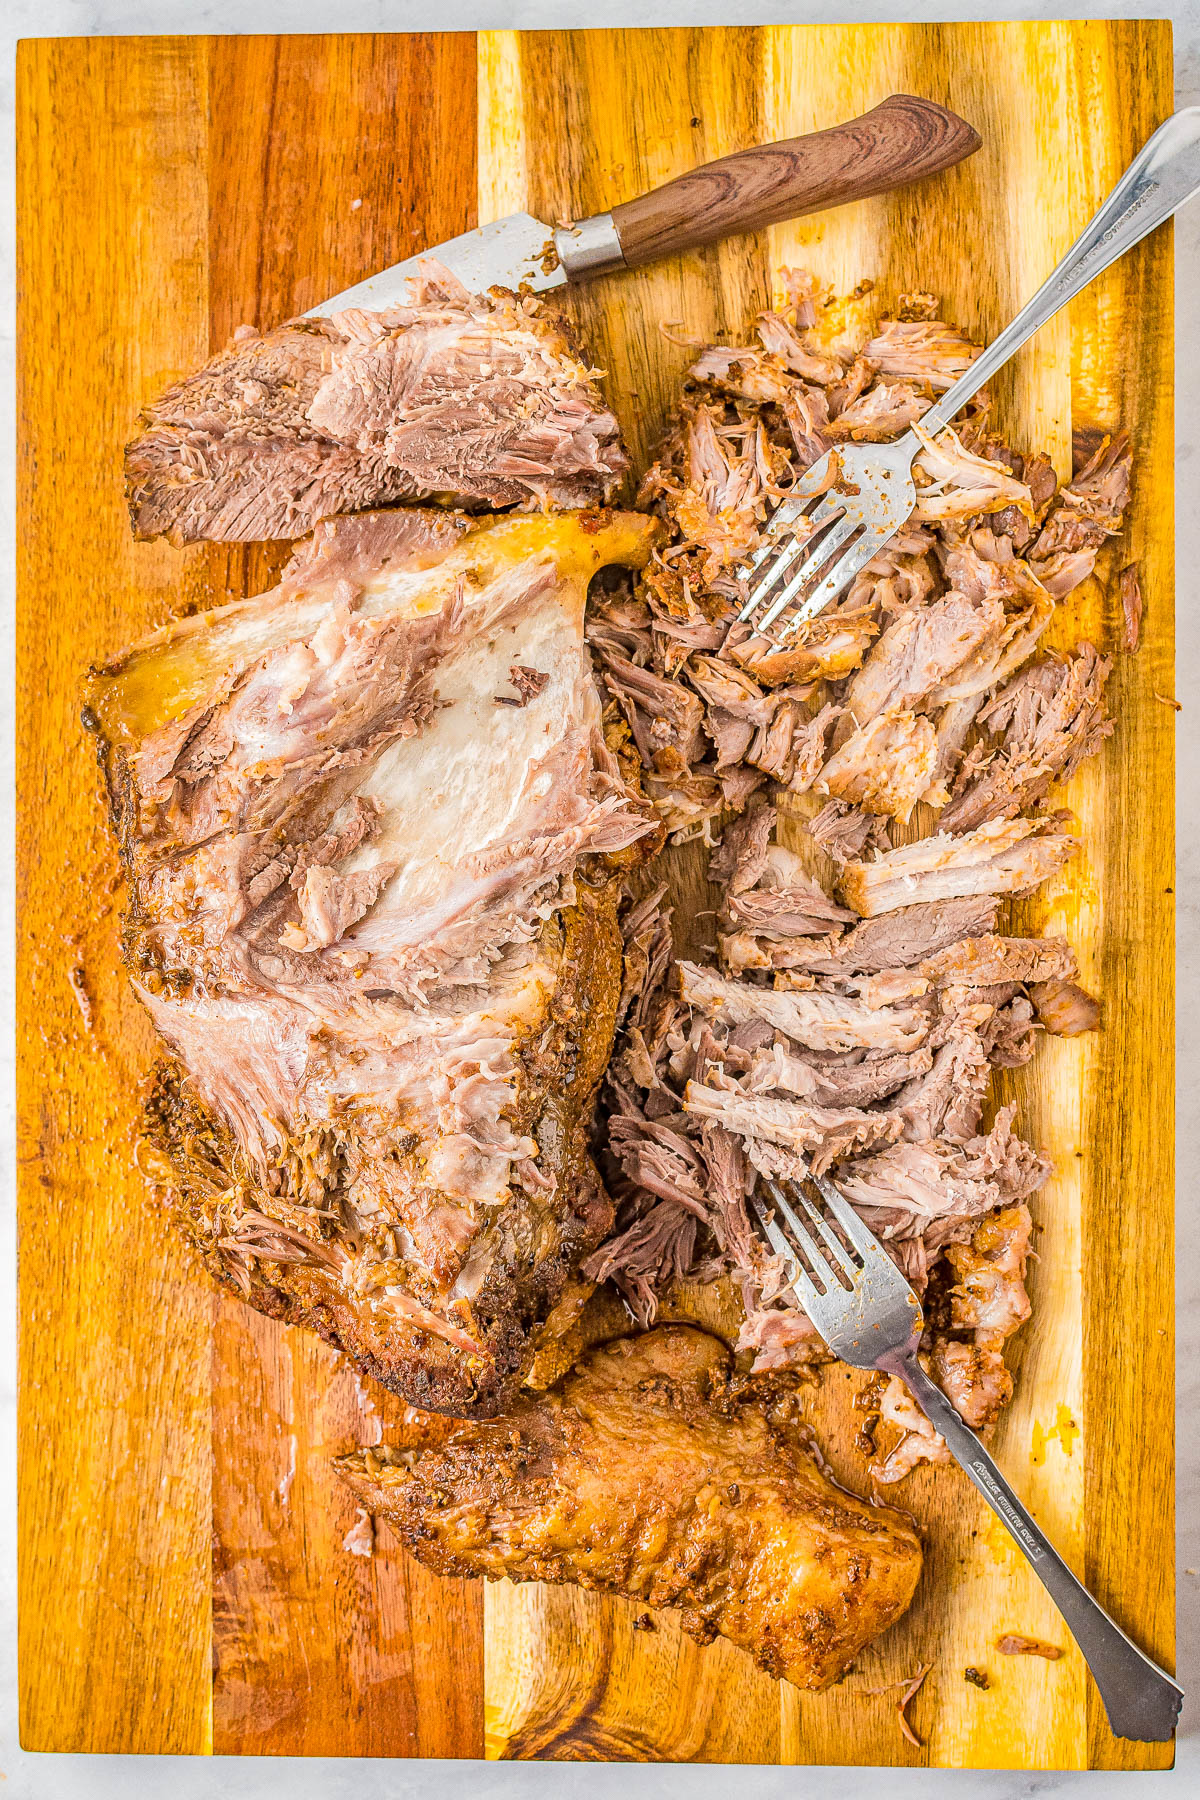 Slow Cooker Pulled Pork - The EASIEST recipe for pulled pork because your Crock-Pot does all the work for you! Set it and forget it for this AMAZING pulled pork that's super flavorful and so tender and juicy! Great for pulled pork sandwiches and tacos!